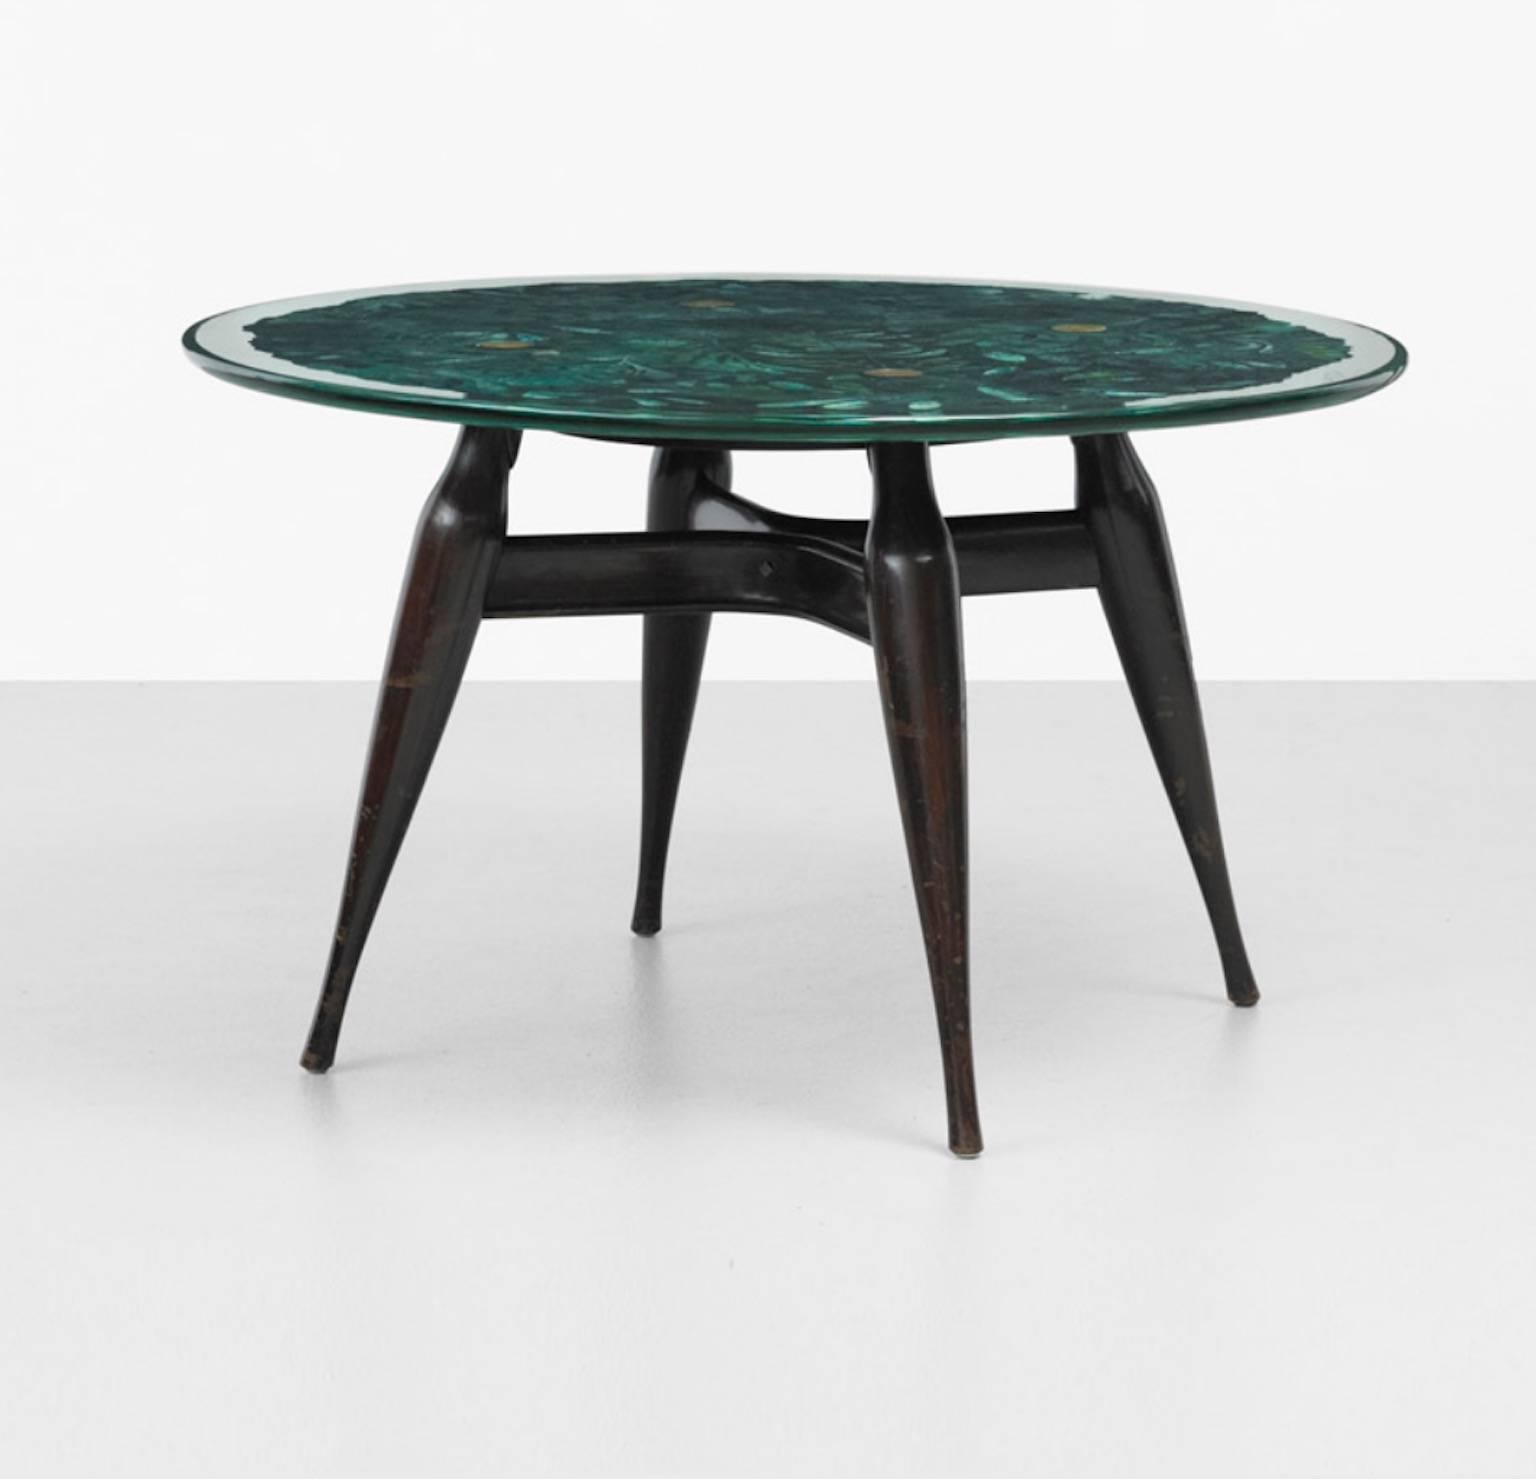 SATURDAY SALE


Exquisite and truly unique round breakfast or dining table by Fontana Arte with 48 inch round glass crystal top by Securitat Sant-Gobain, reverse painted abstract botanicals in shades of green by artist Dube' (Duilio Barnabé,